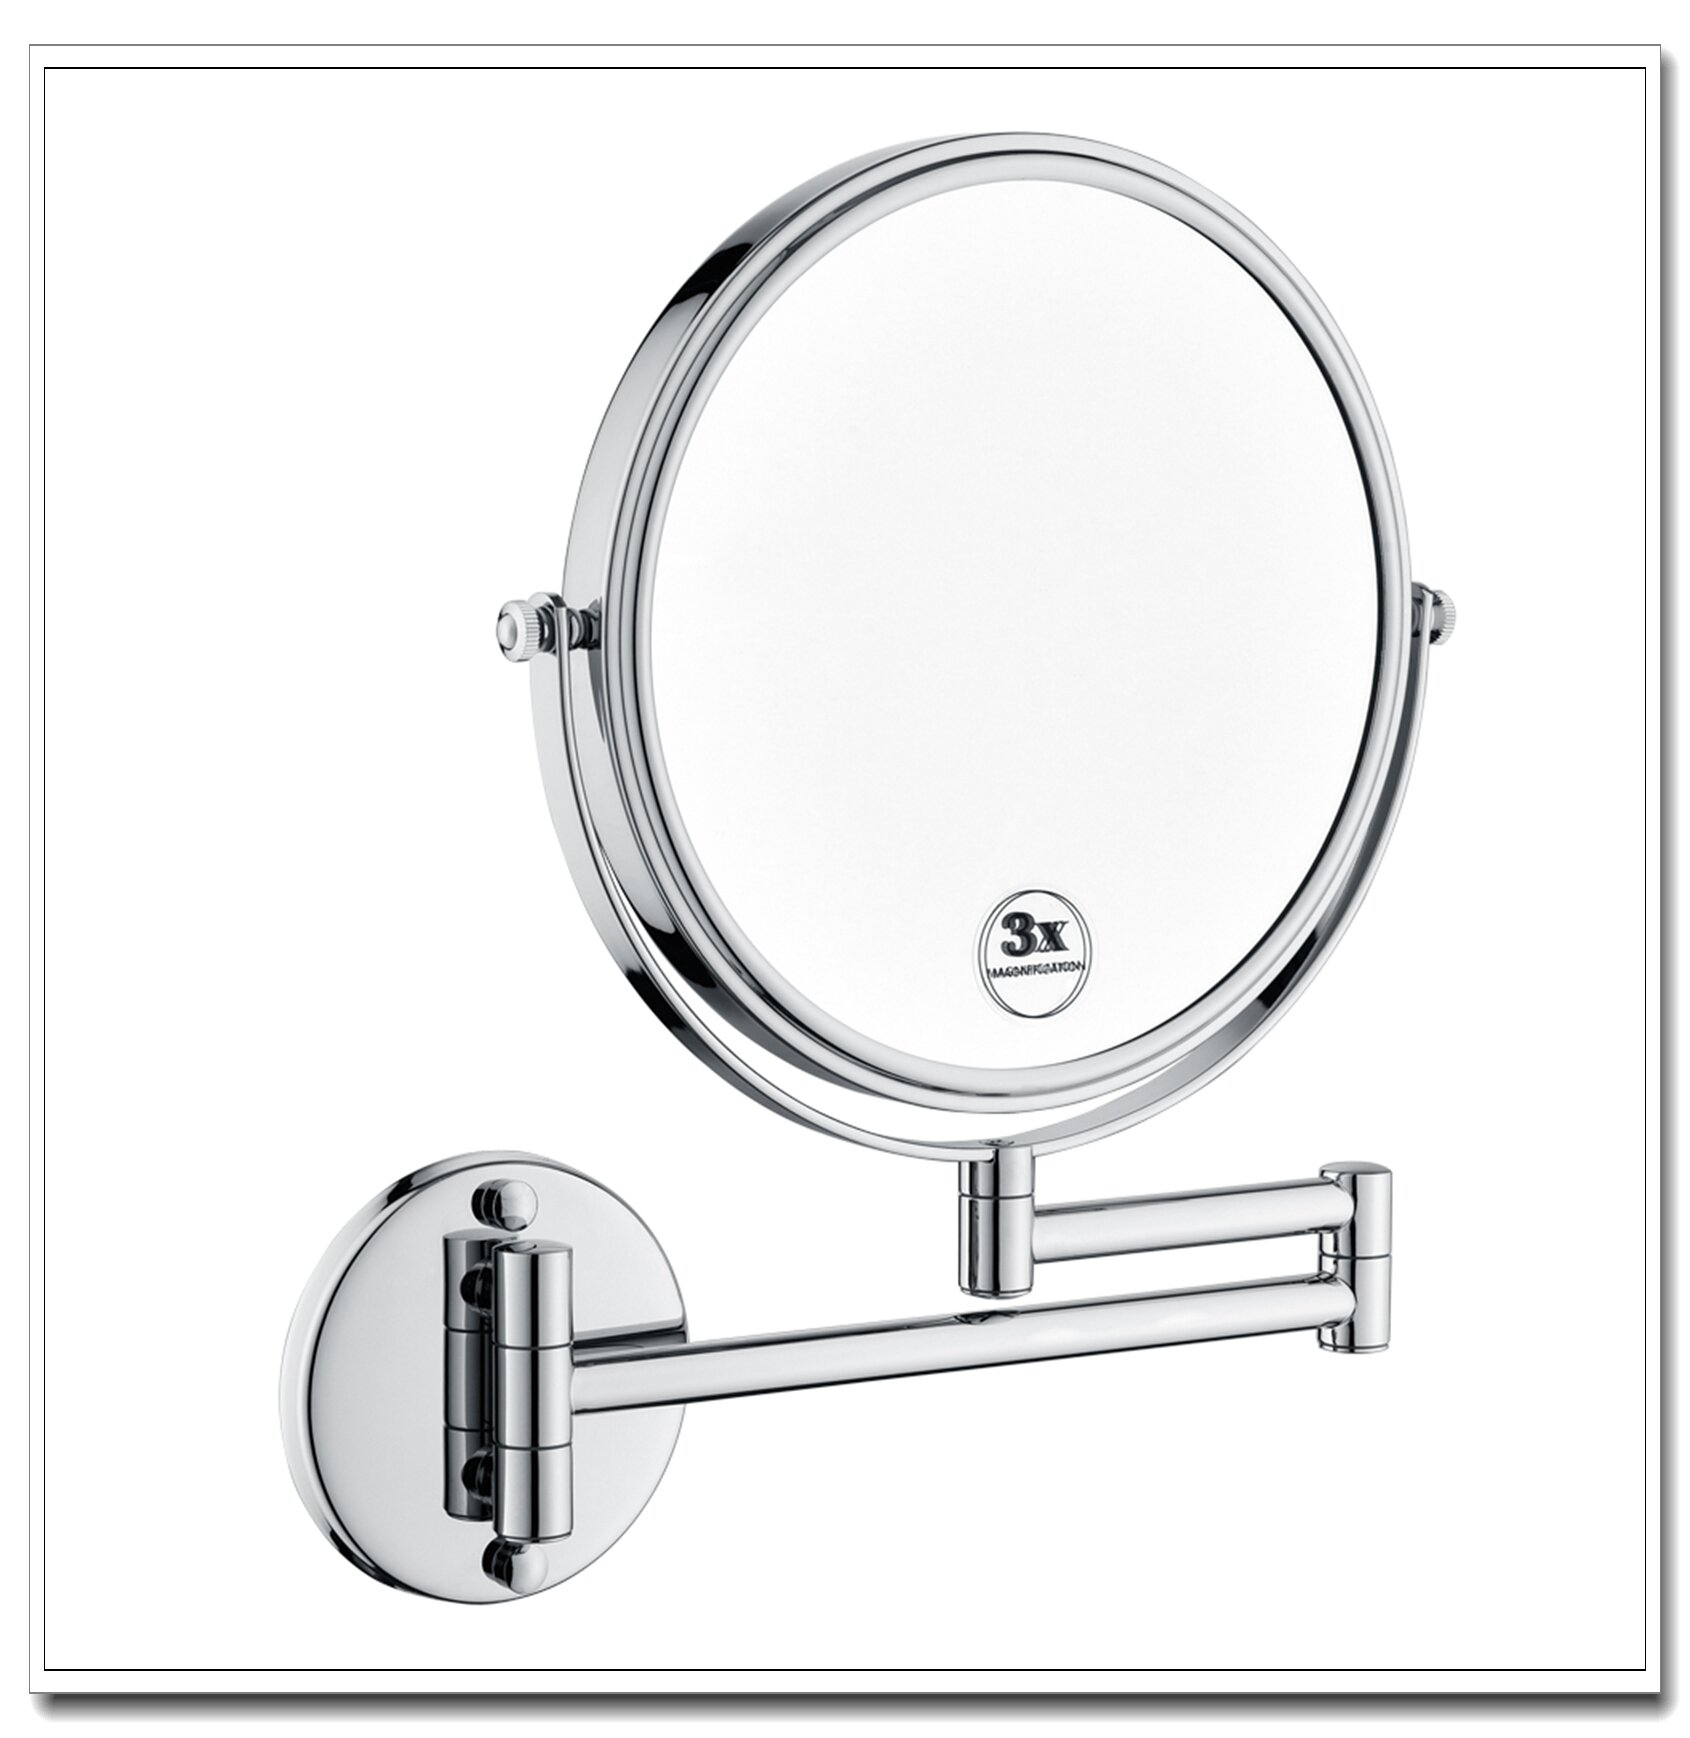 New Wall Mounted Black 8" Magnifying Mirror For Bath Makeup Swing Arm 3X 2-Sided 